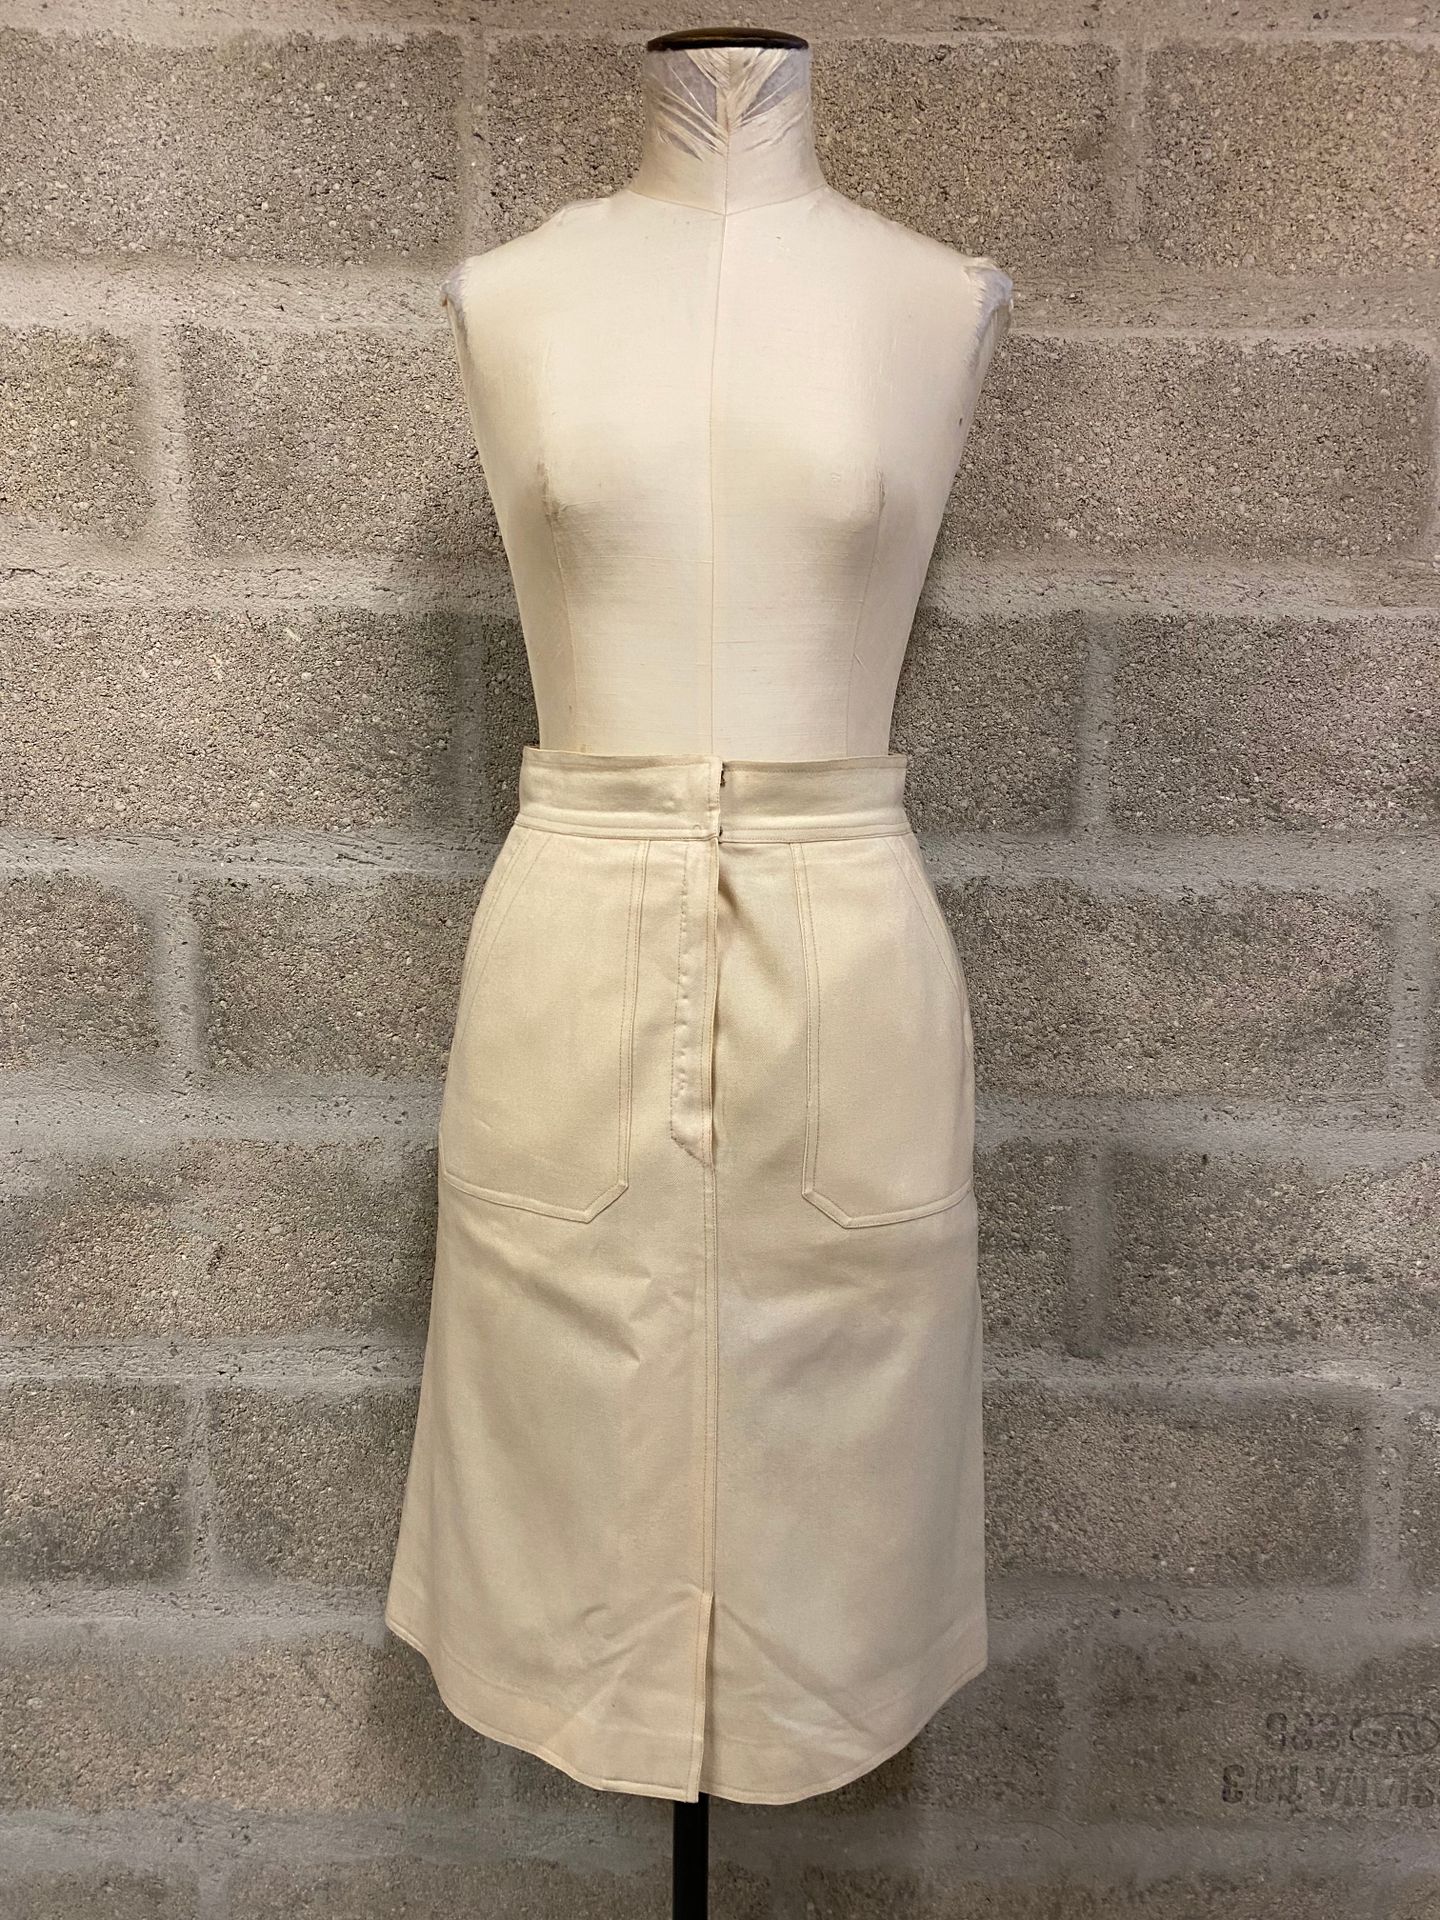 CHLOE Straight skirt in off-white wool, back pockets

Condition of use